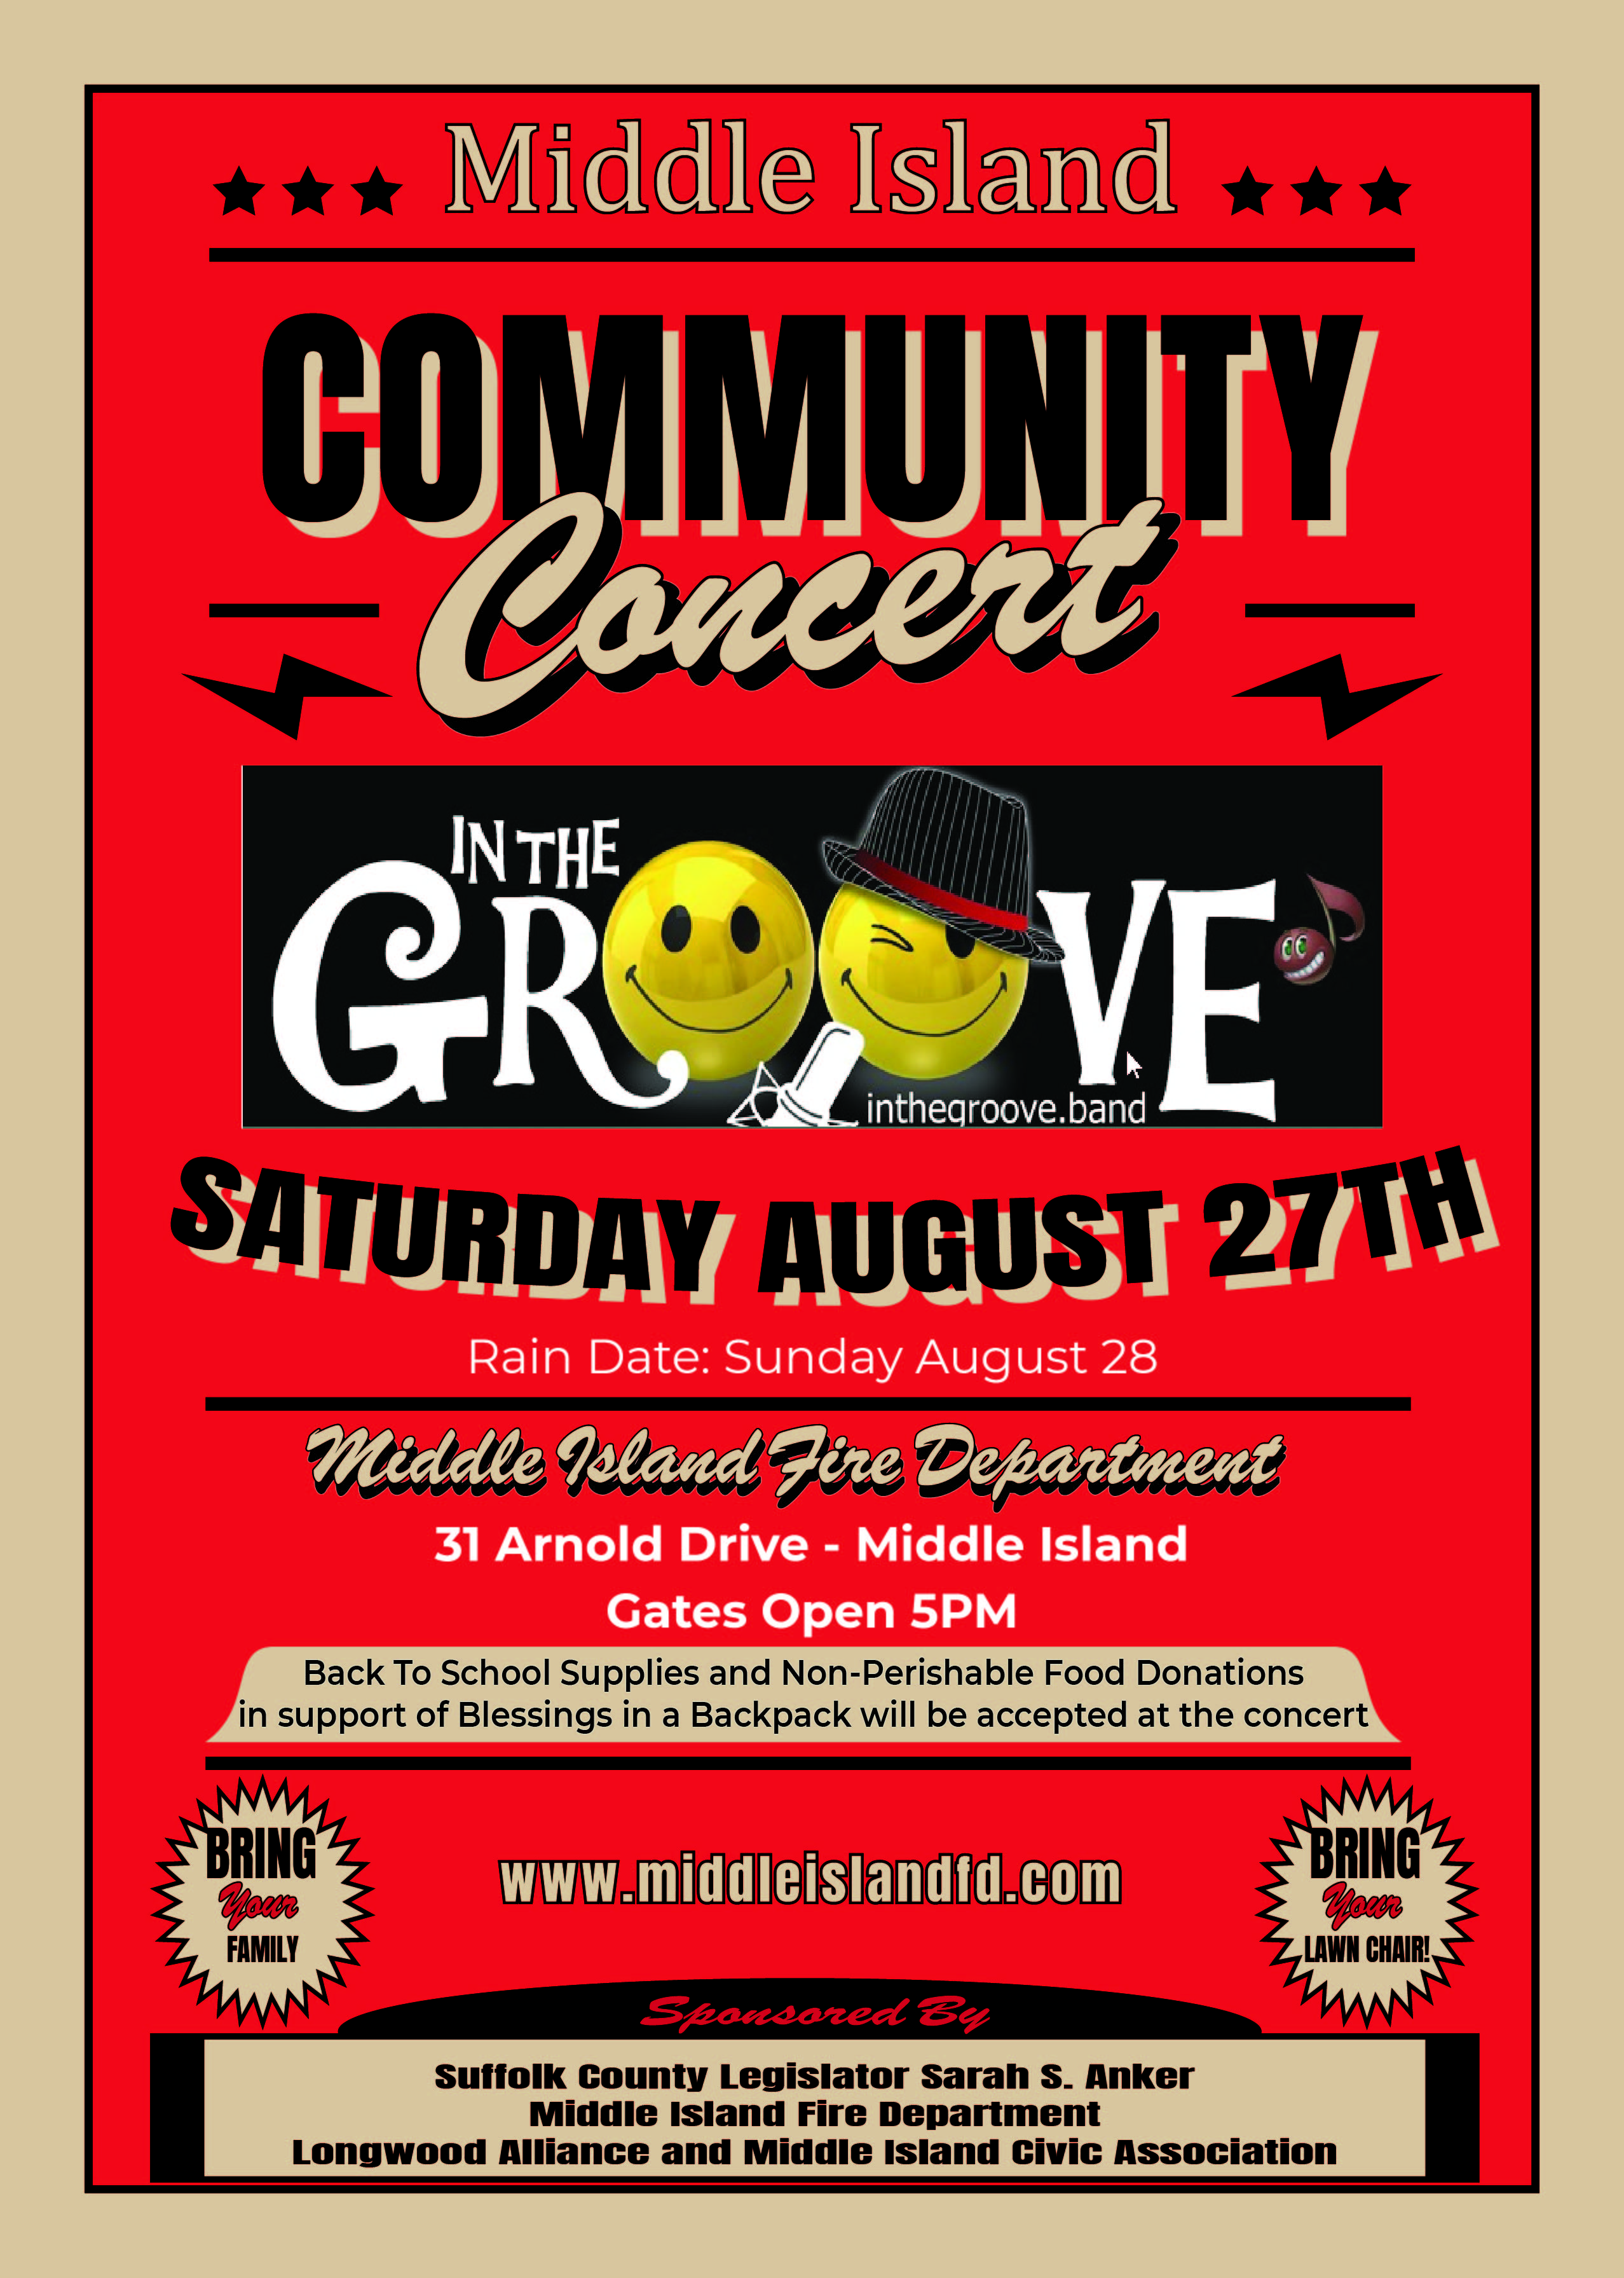 In the Groove concert flyer